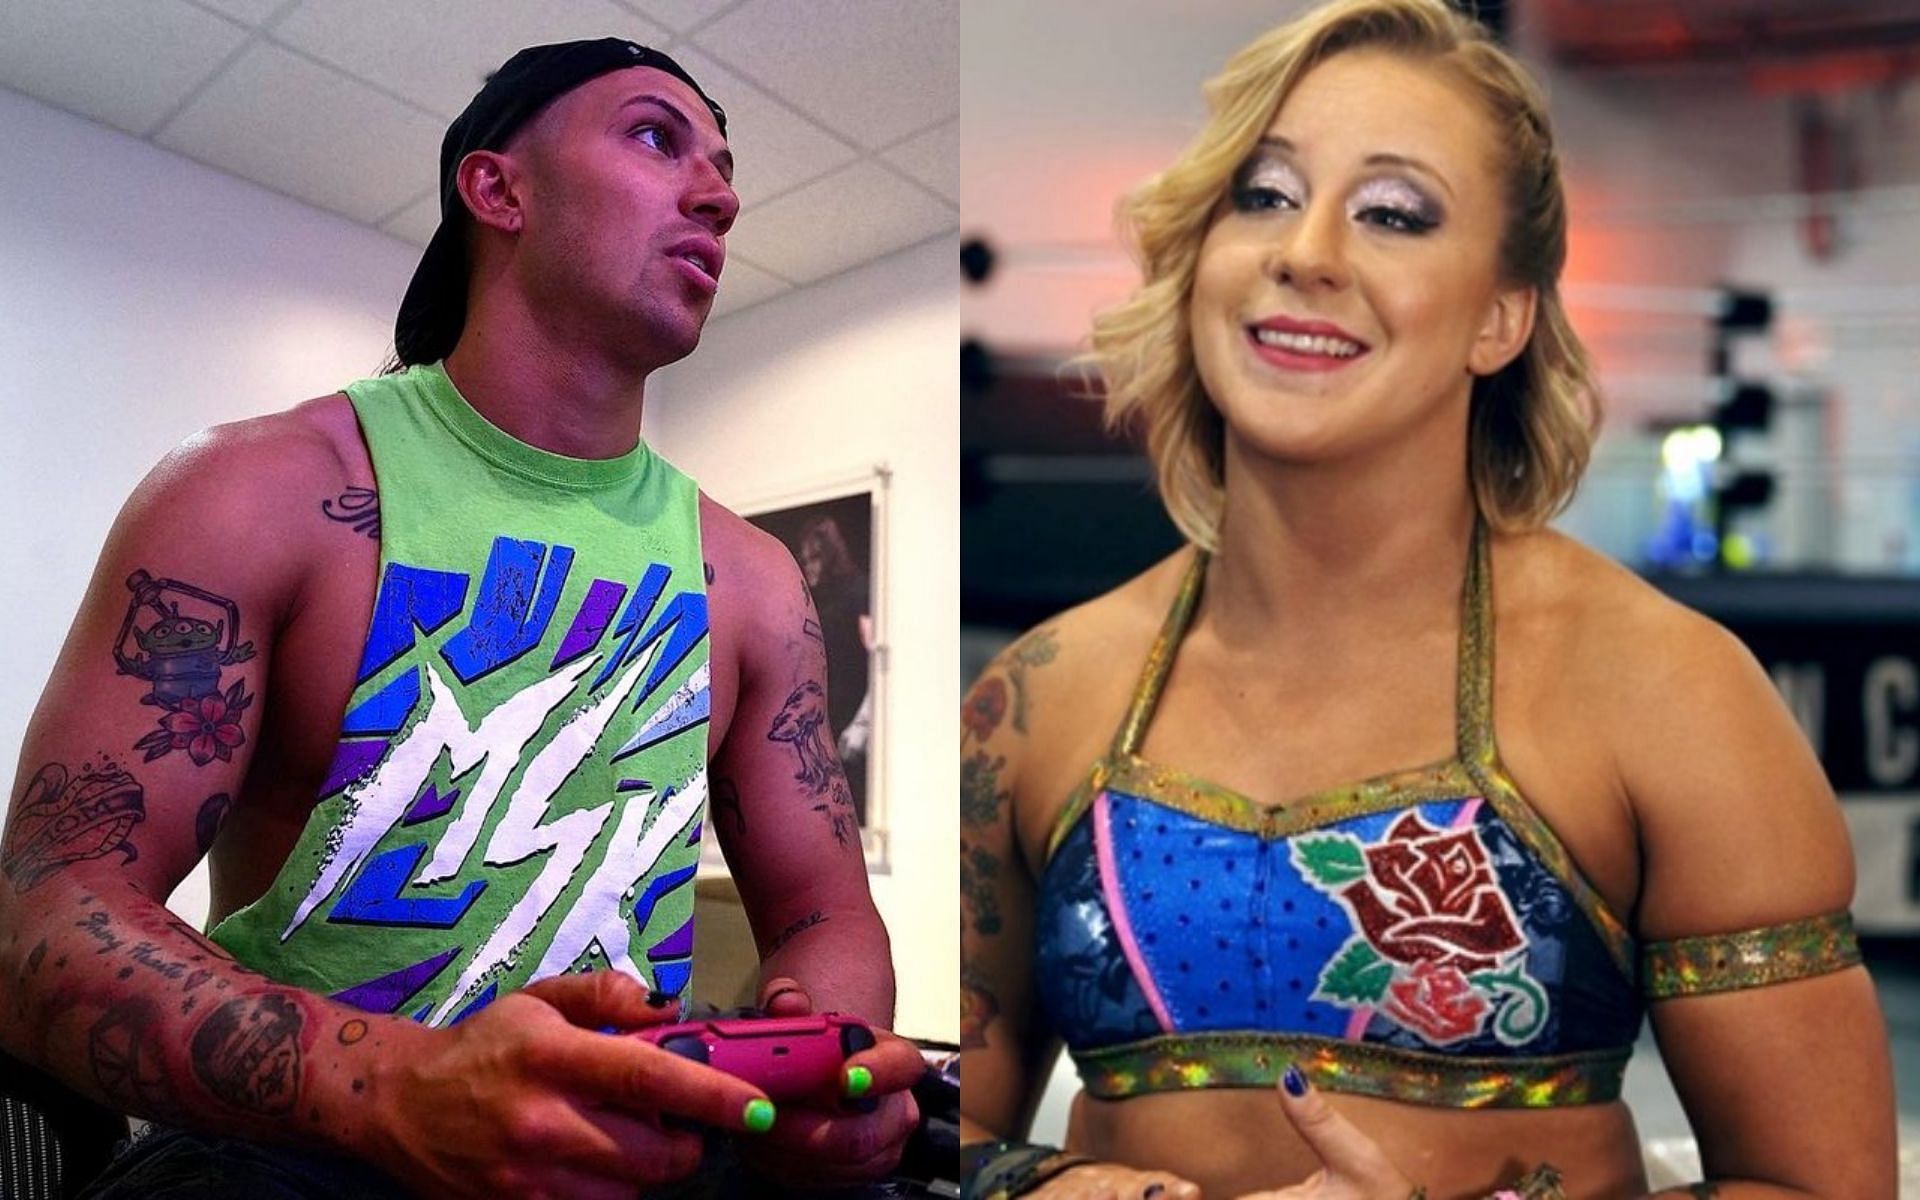 Nash Carter and Kimber Lee married each other back in May 2020